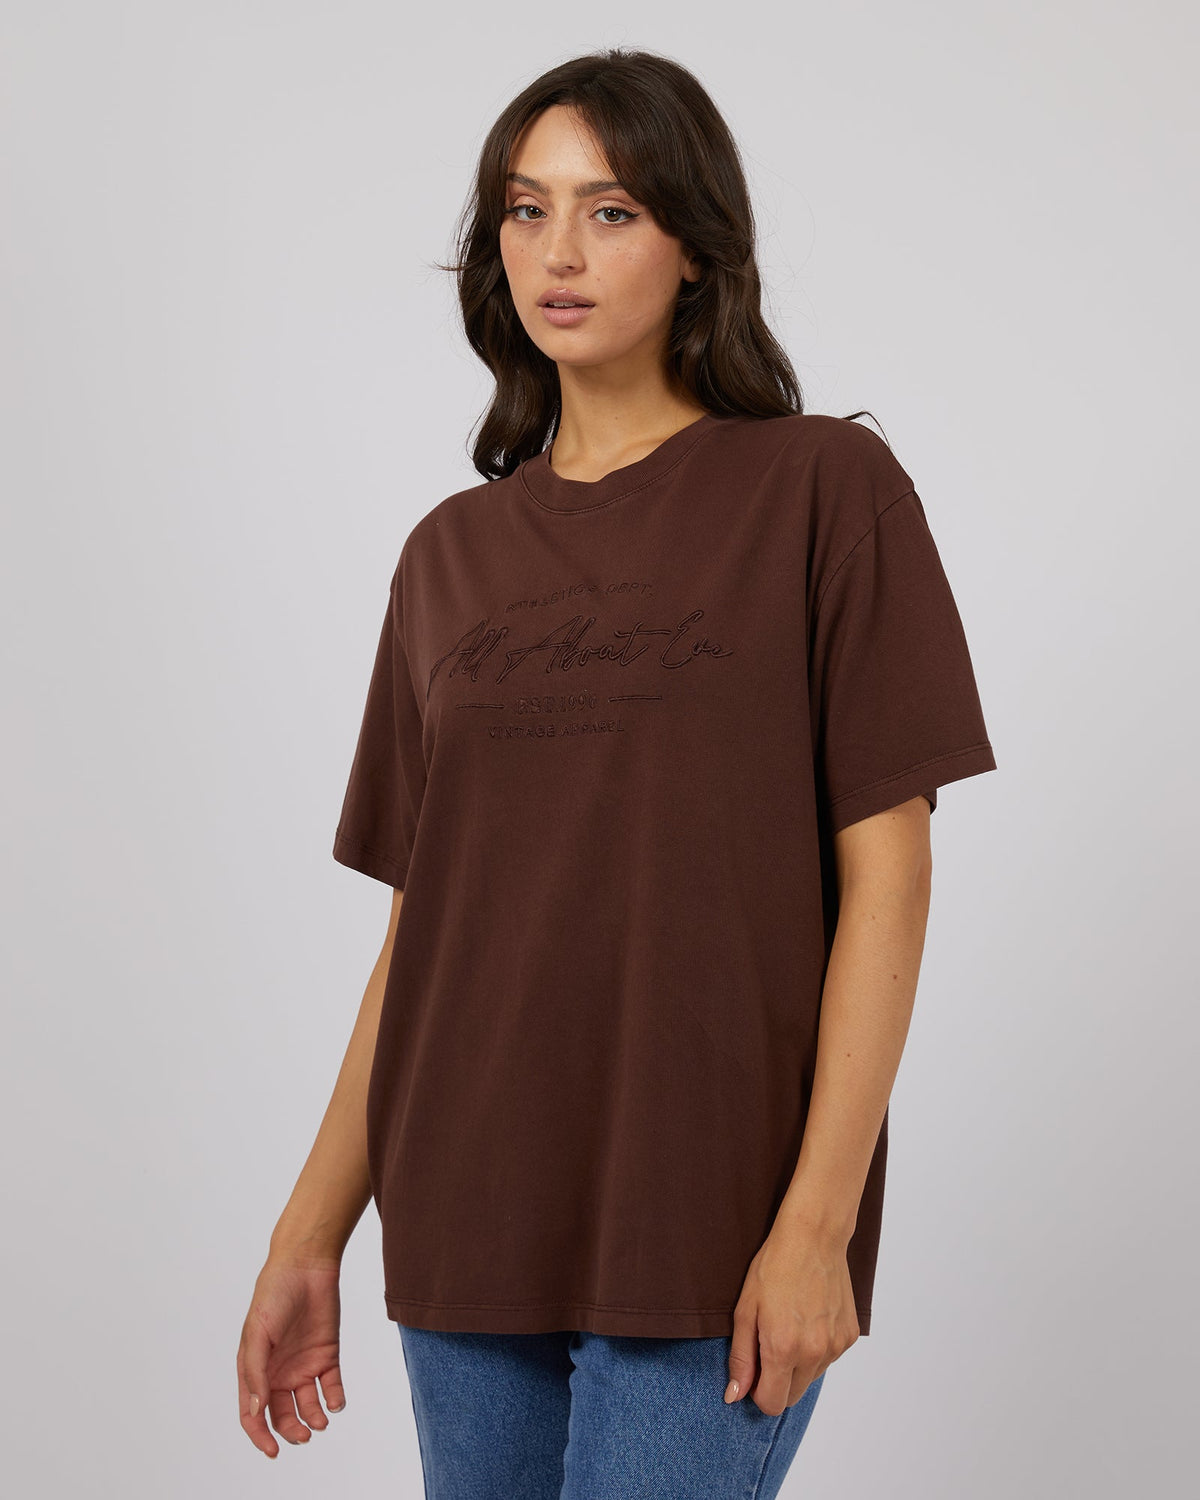 All About Eve-Classic Tee Brown-Edge Clothing